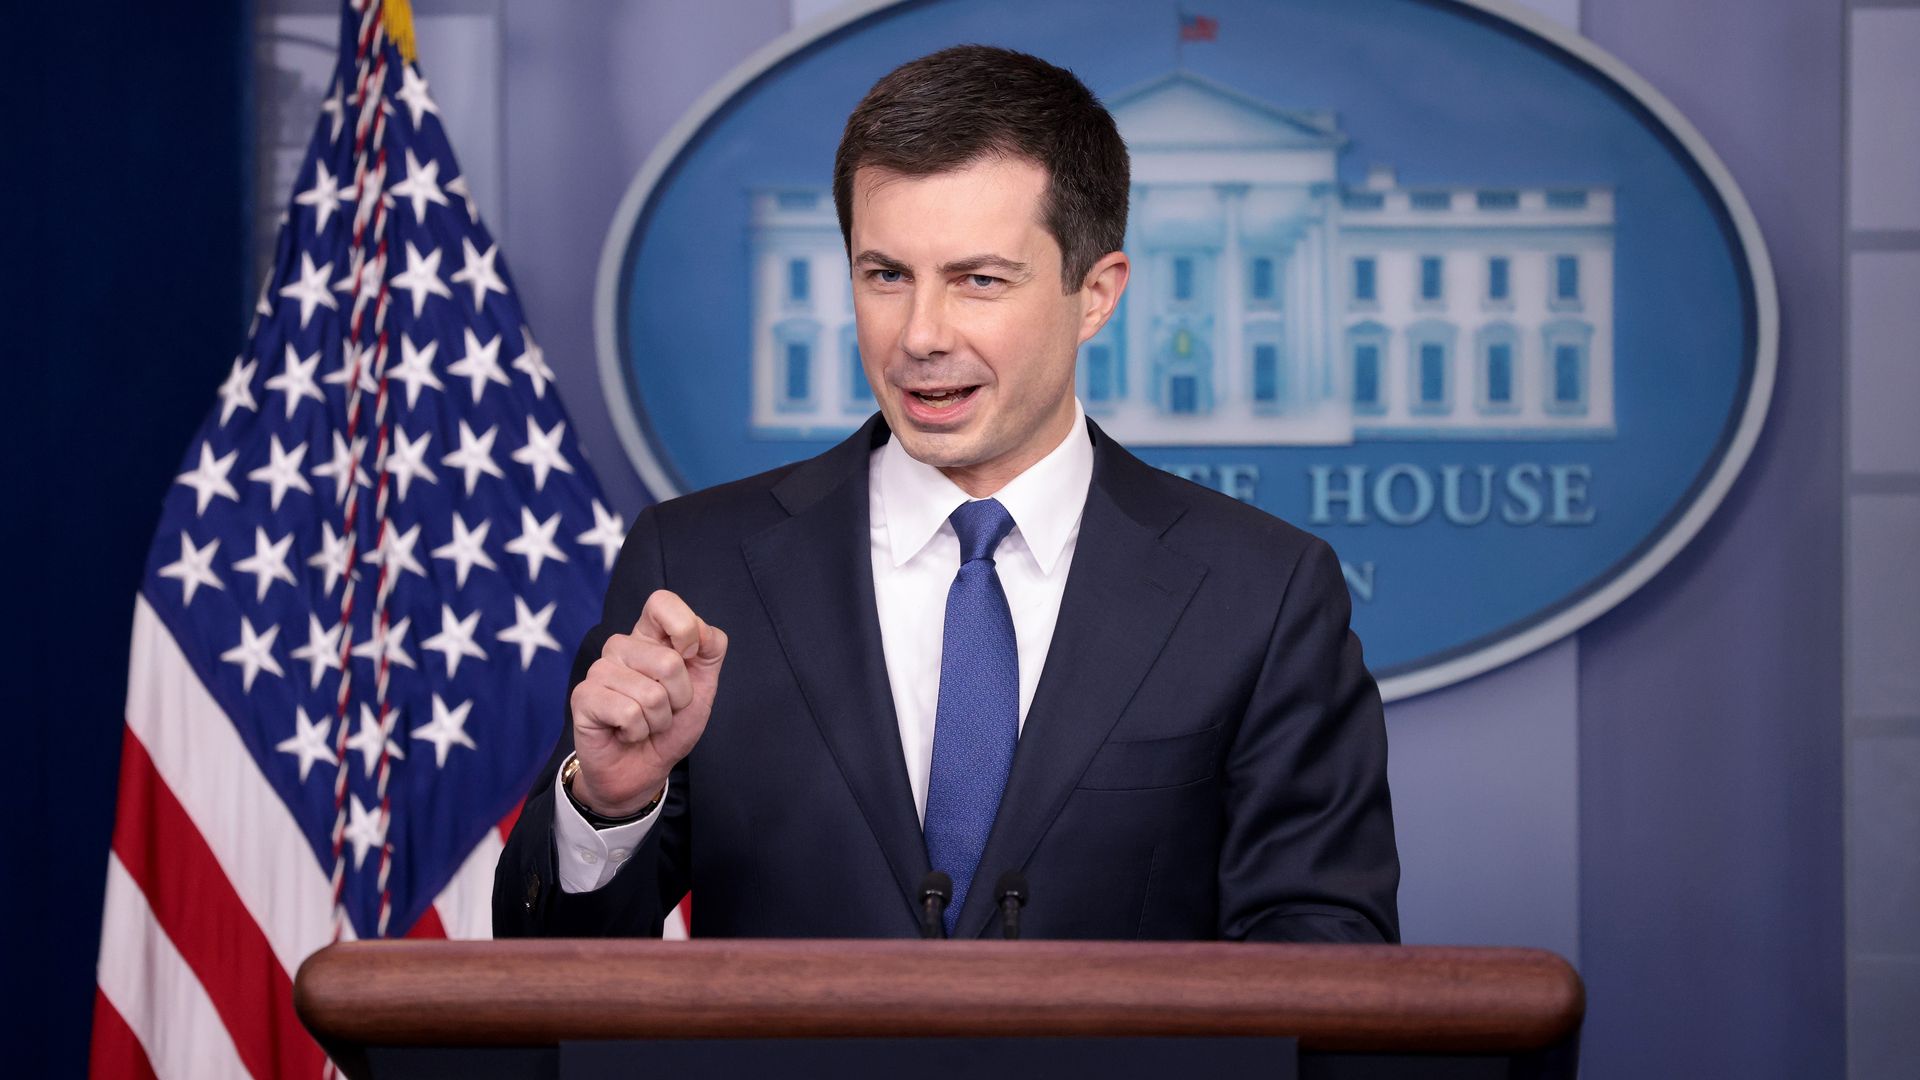 Secretary of Transportation Pete Buttigieg speaks during the daily briefing at the White House on November 08